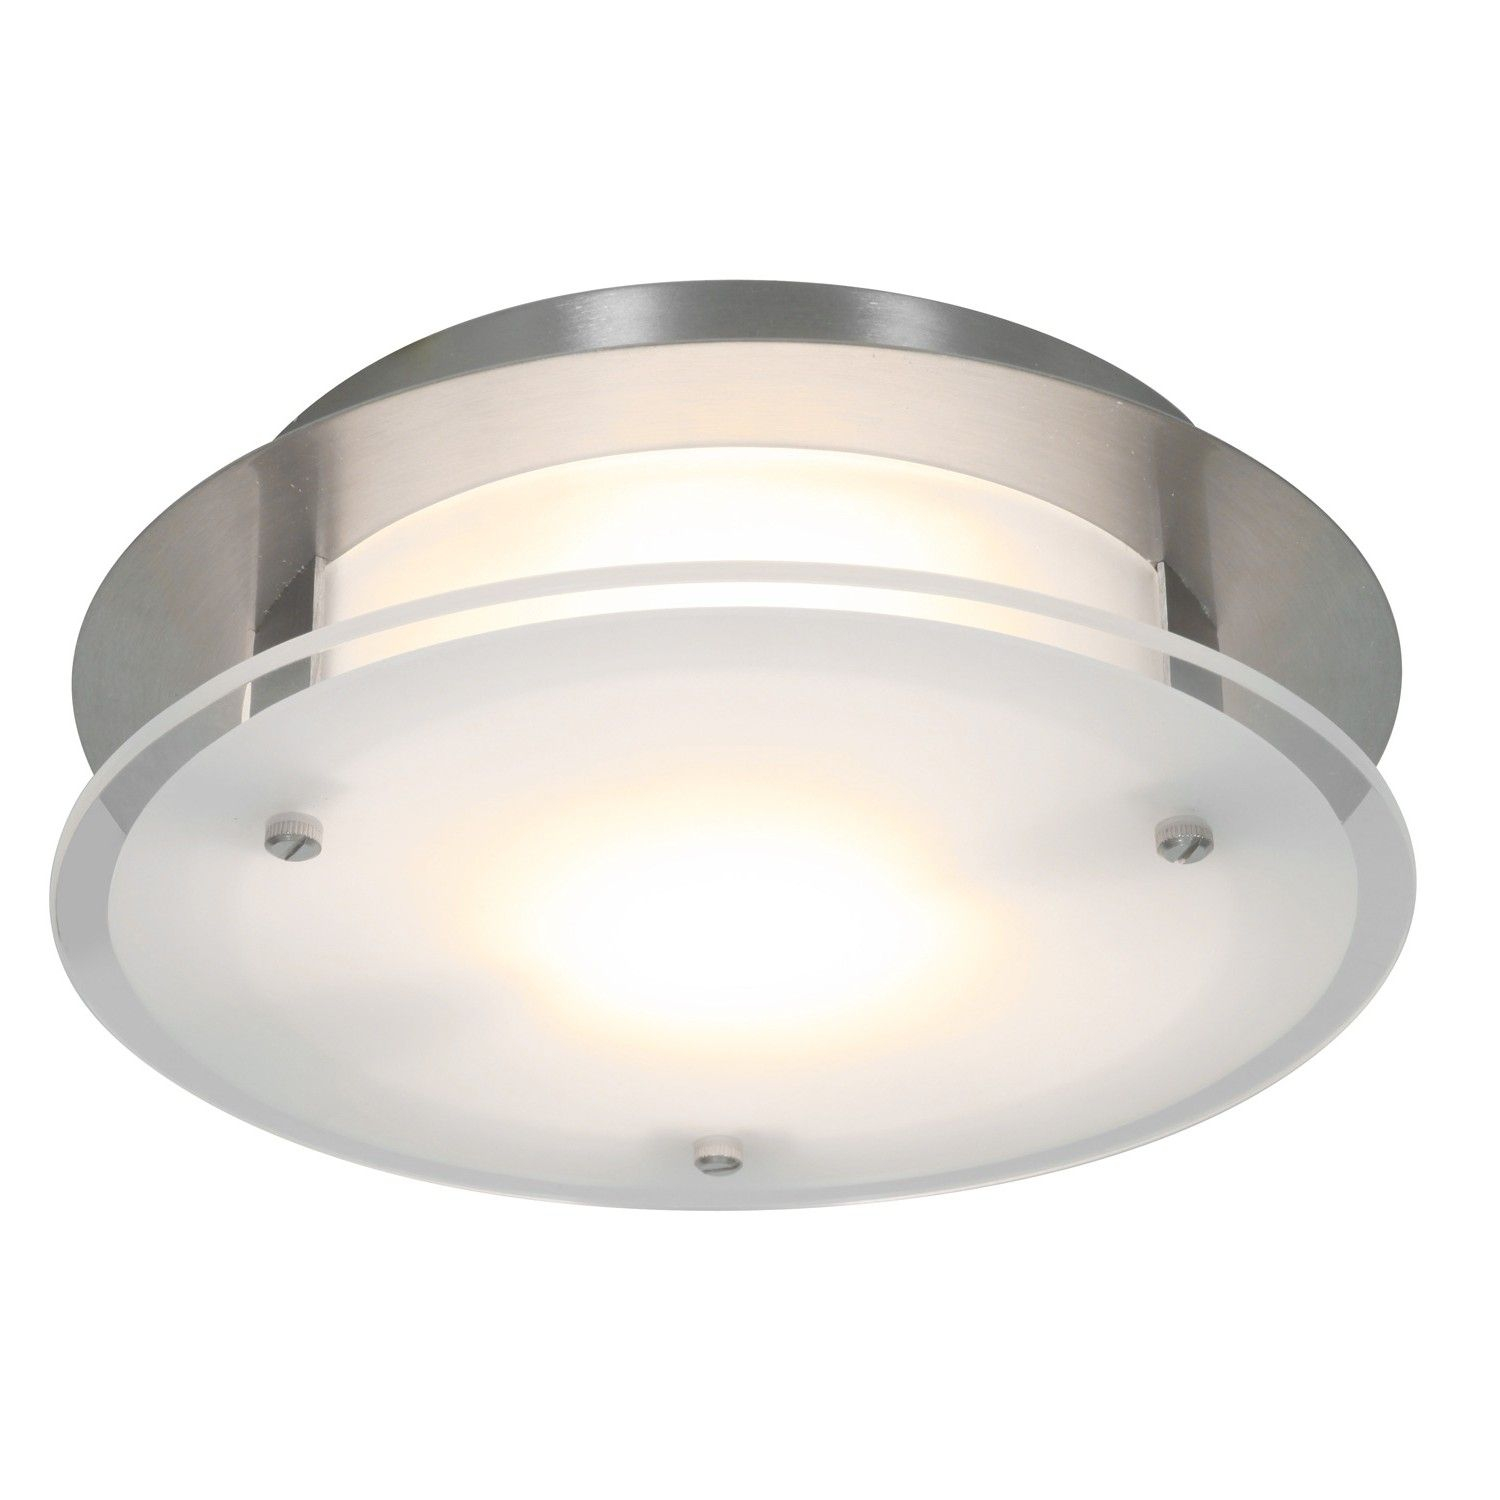 Luxury Ductless Bathroom Fan With Light Bathroom Fan Light pertaining to dimensions 1500 X 1500